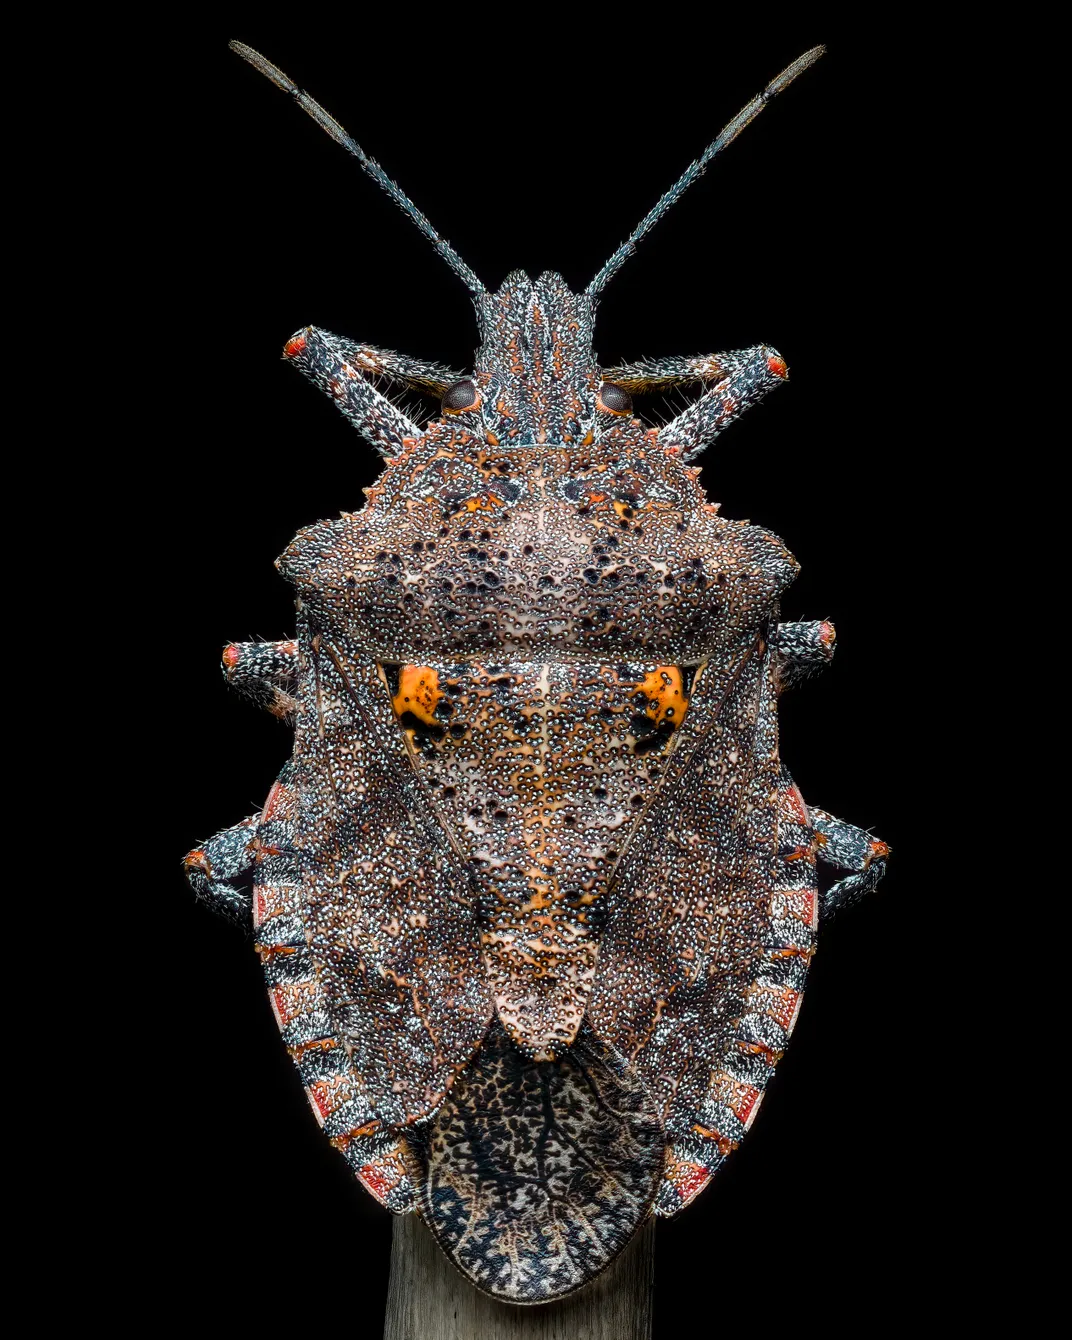 overhead view of a stink bug on a black background shows its rough-looking texture